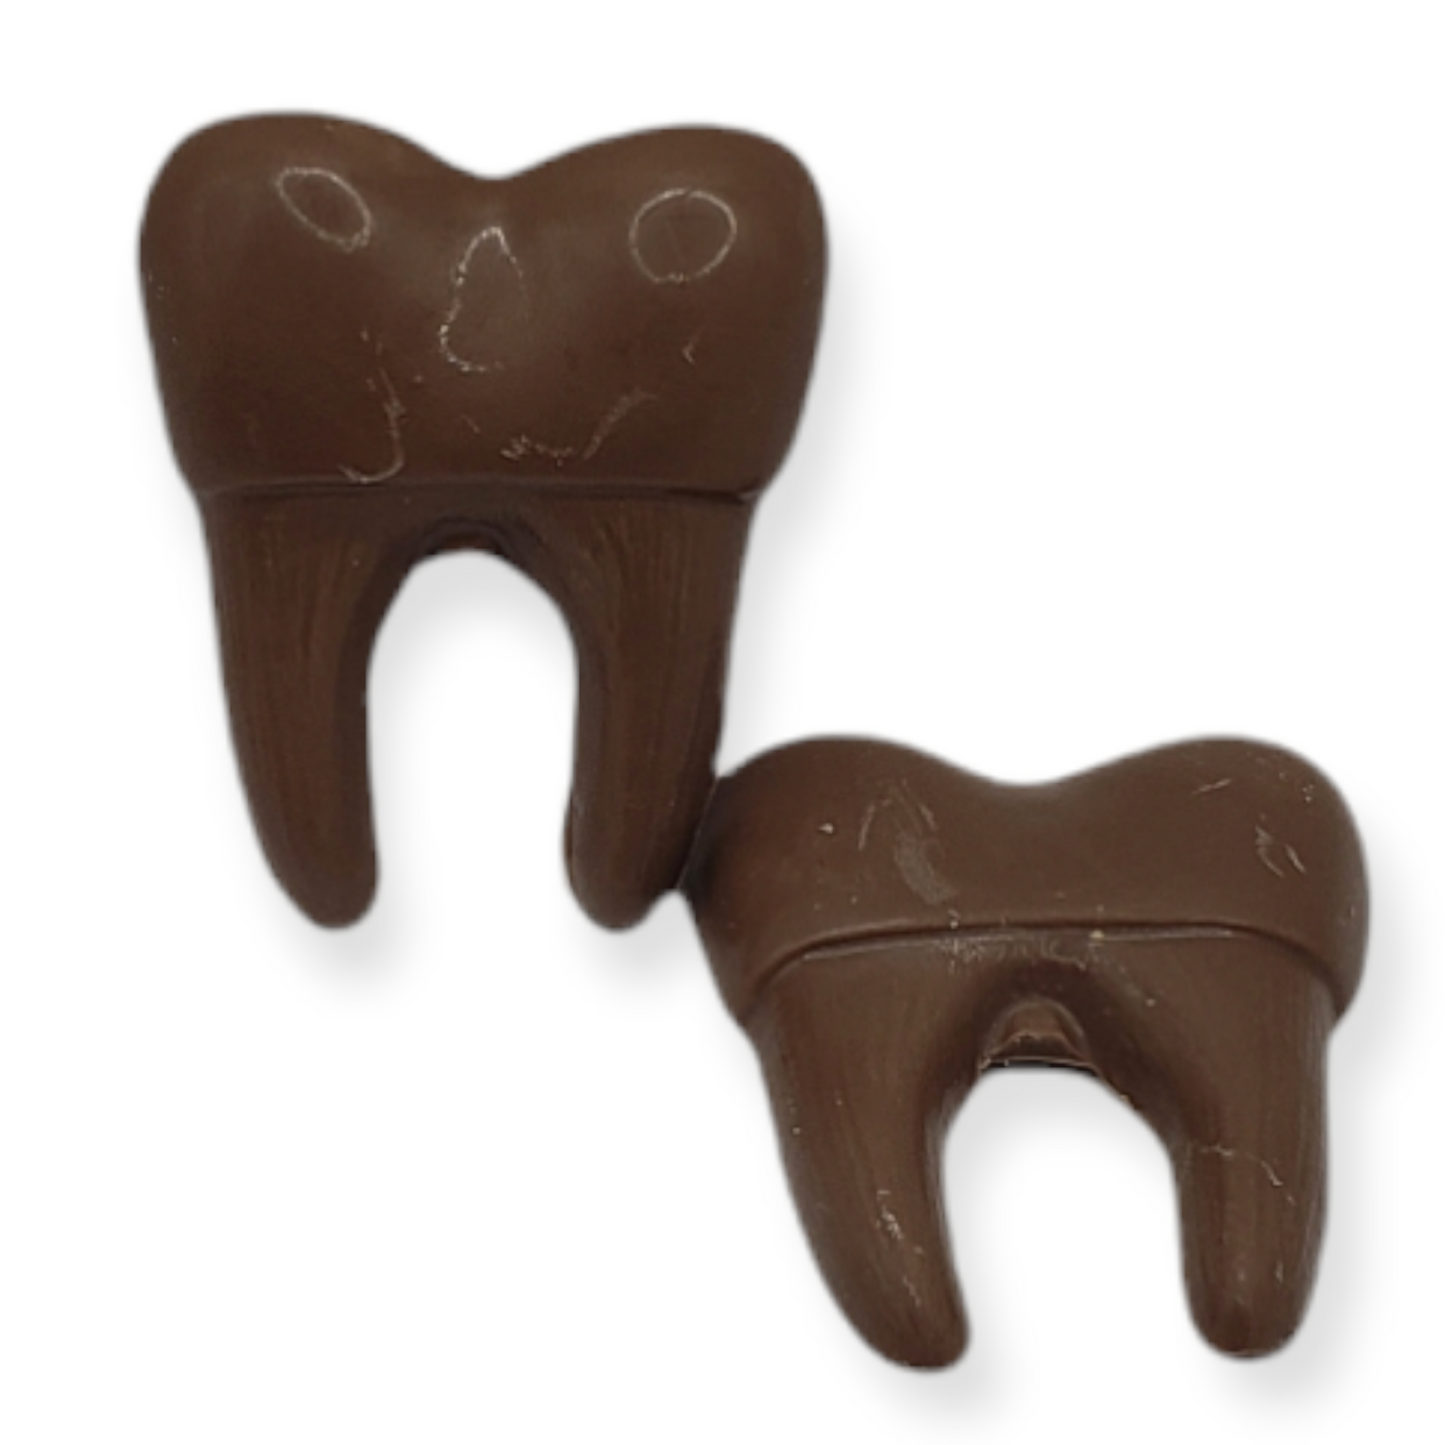 Corporate Gifts- Dental